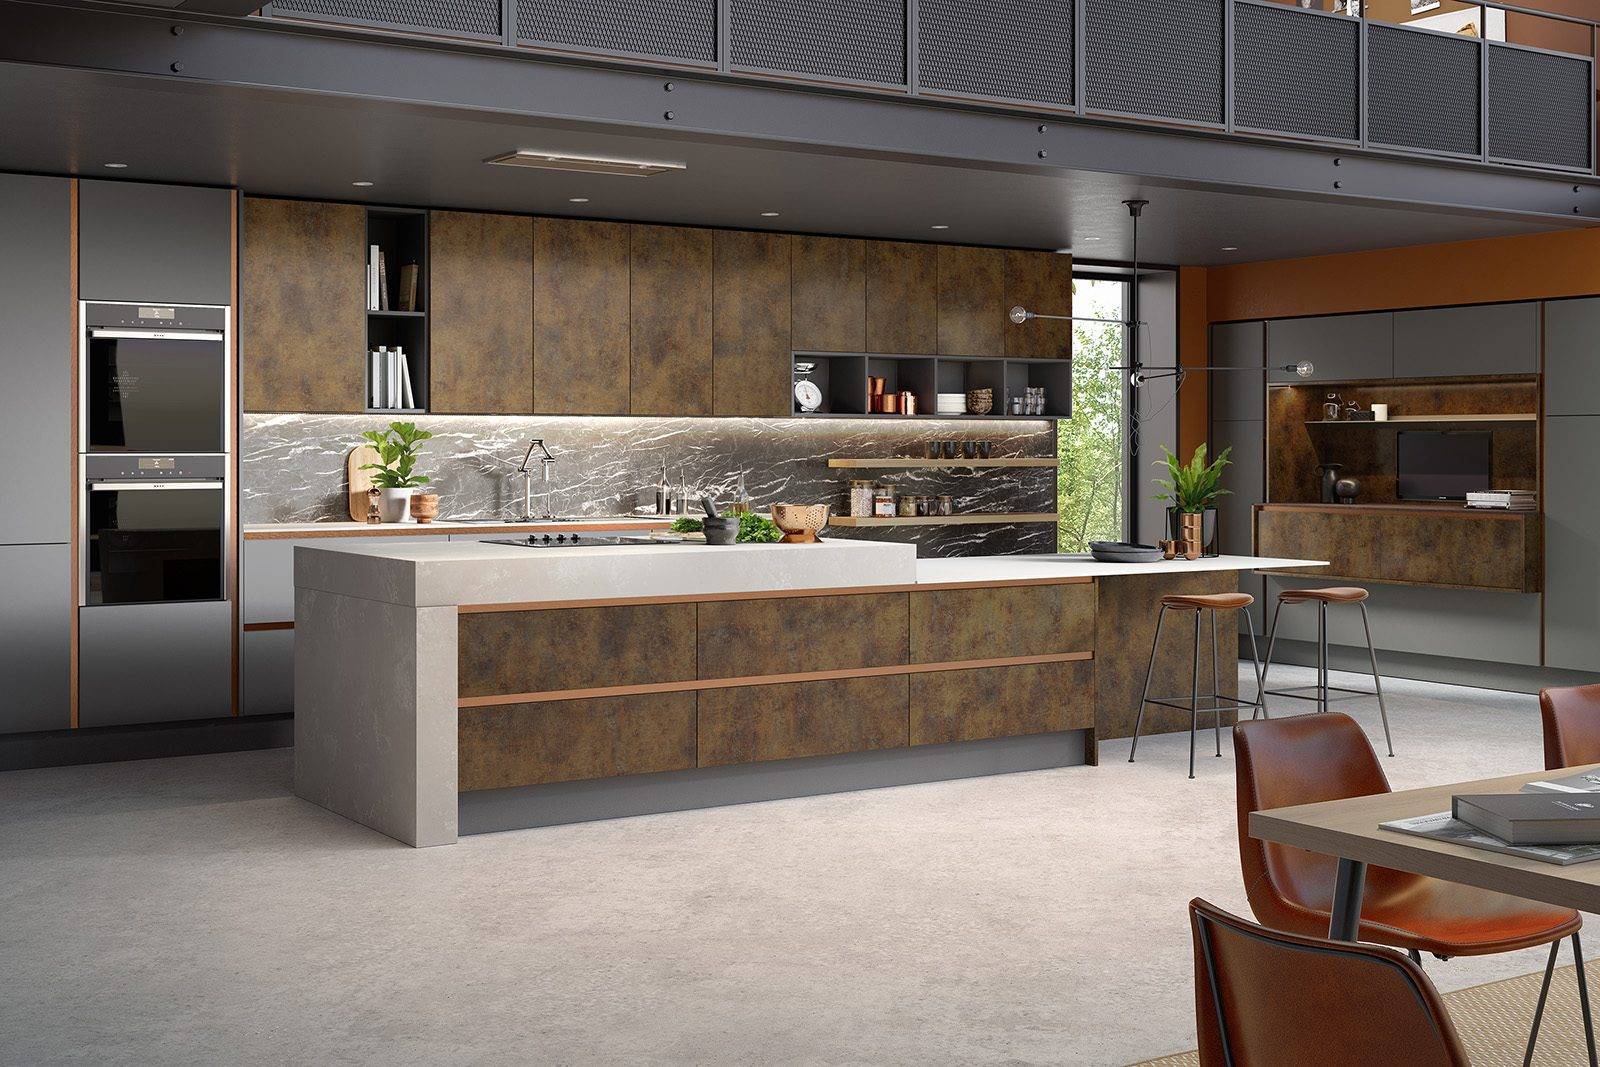 Inset Cube Copper Dusk Grey And Graphite 1 | Net Kitchens, Walthamstow